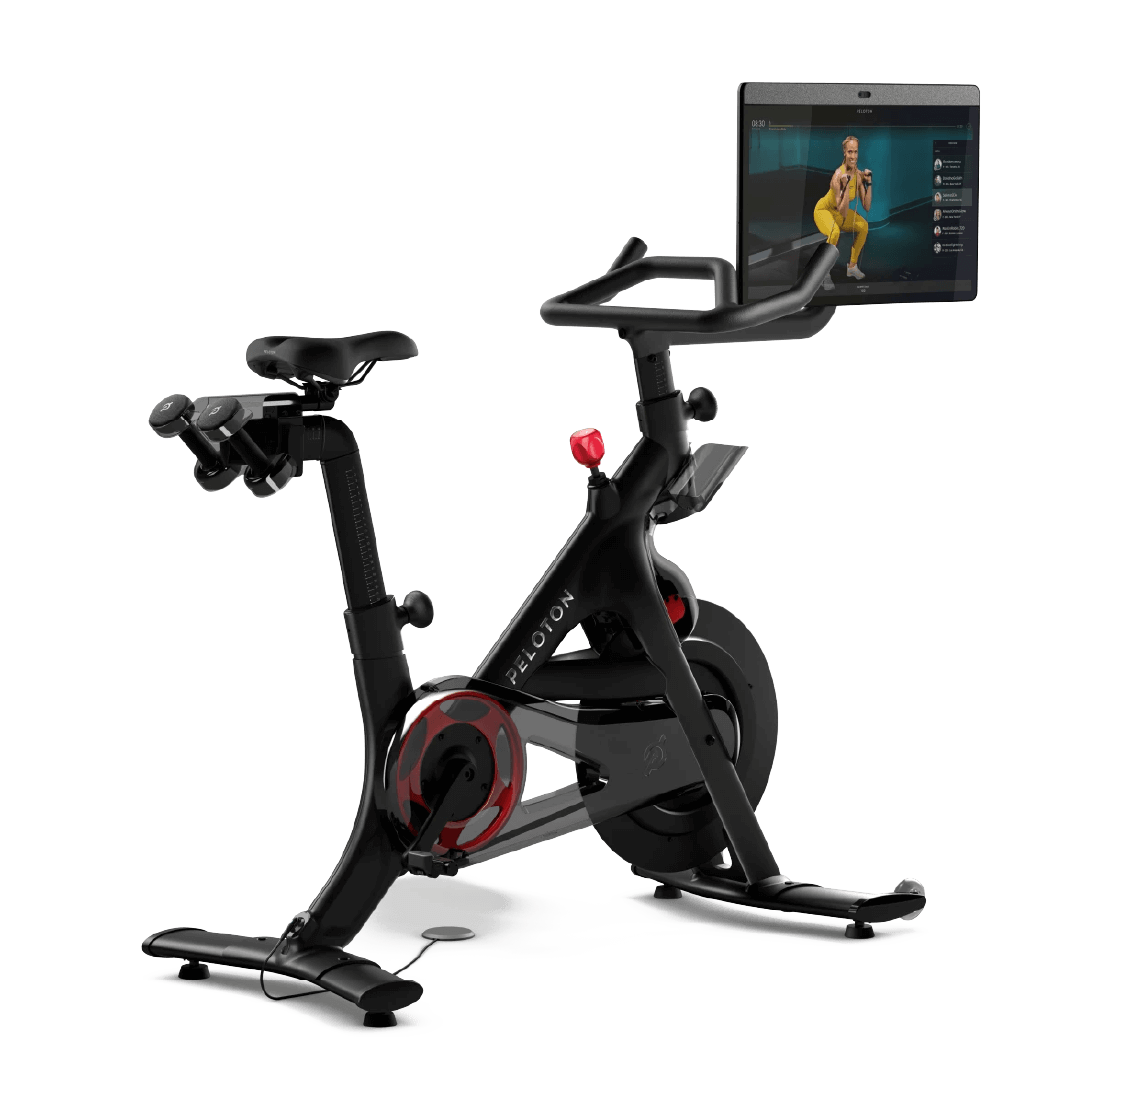 Compare freebeat bikes with Peloton bike+. Immersive cardio and artist generated interactive virtual workout stages. The most connected home exercise bike. Cycling, strength training, cardio, and more, experience Lit Bike is features: Auto Resistance Syst